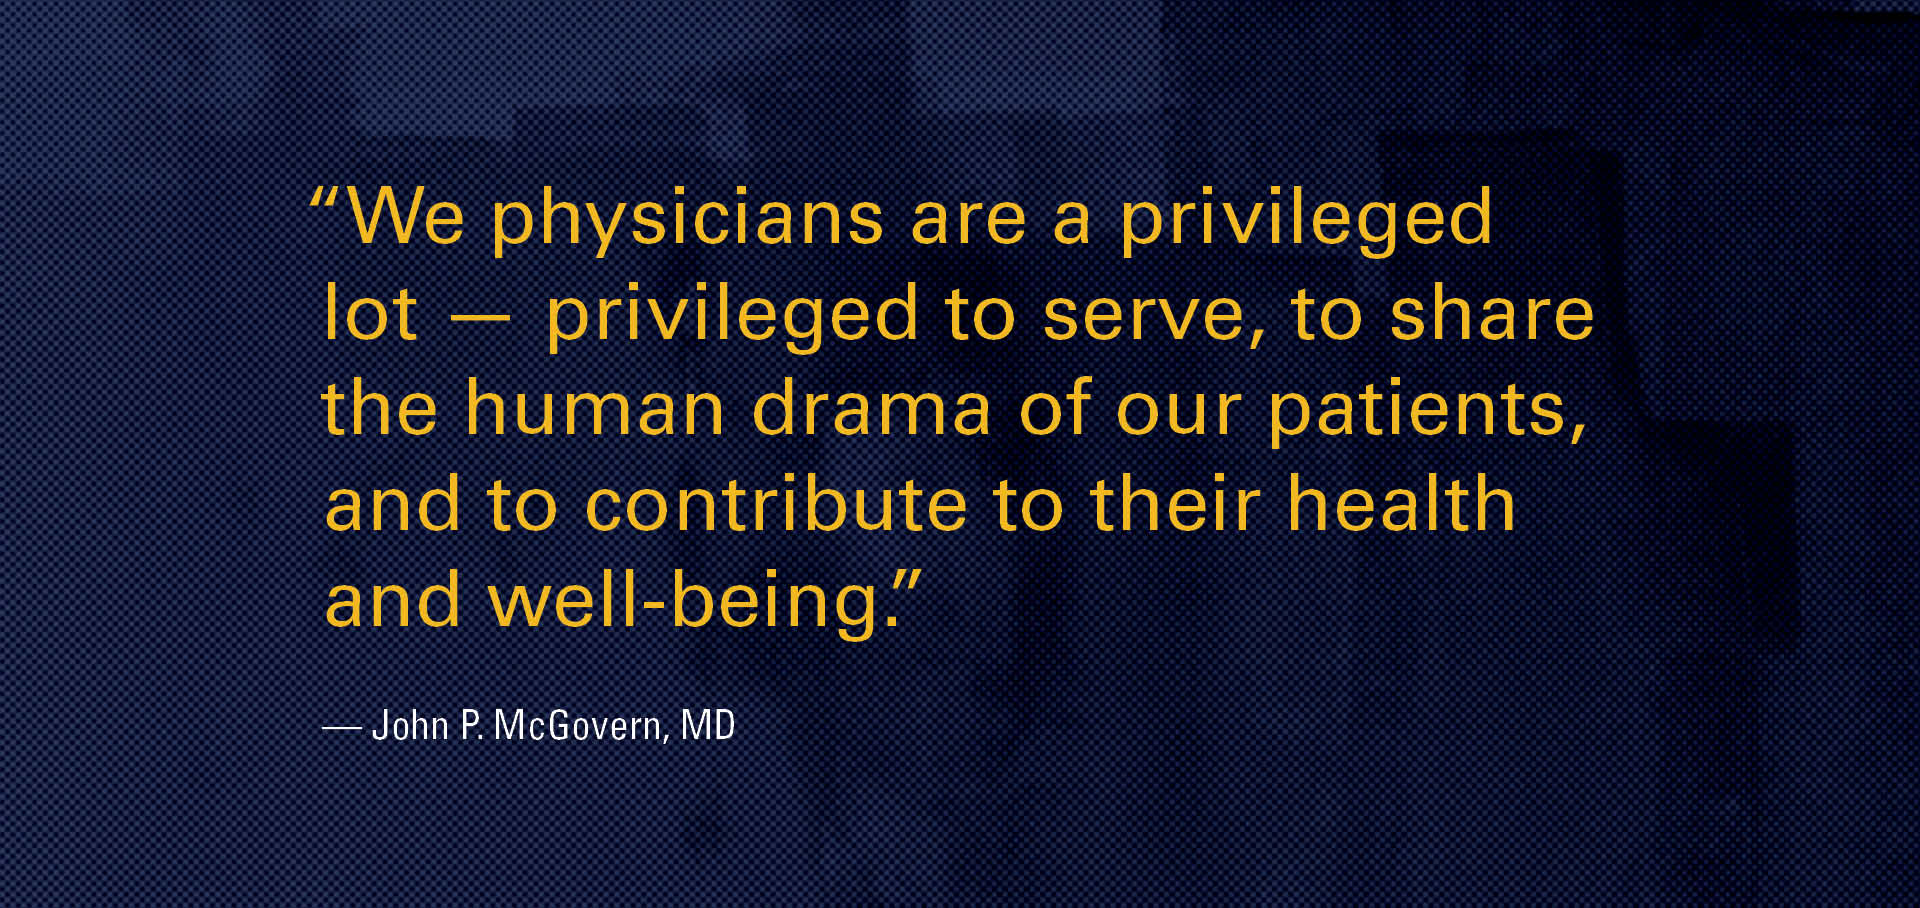 “We physicians are a privileged lot - privileged to serve, to share the human drama of our patients, and to contribute to their health and well-being.” - John P. McGovern, MD